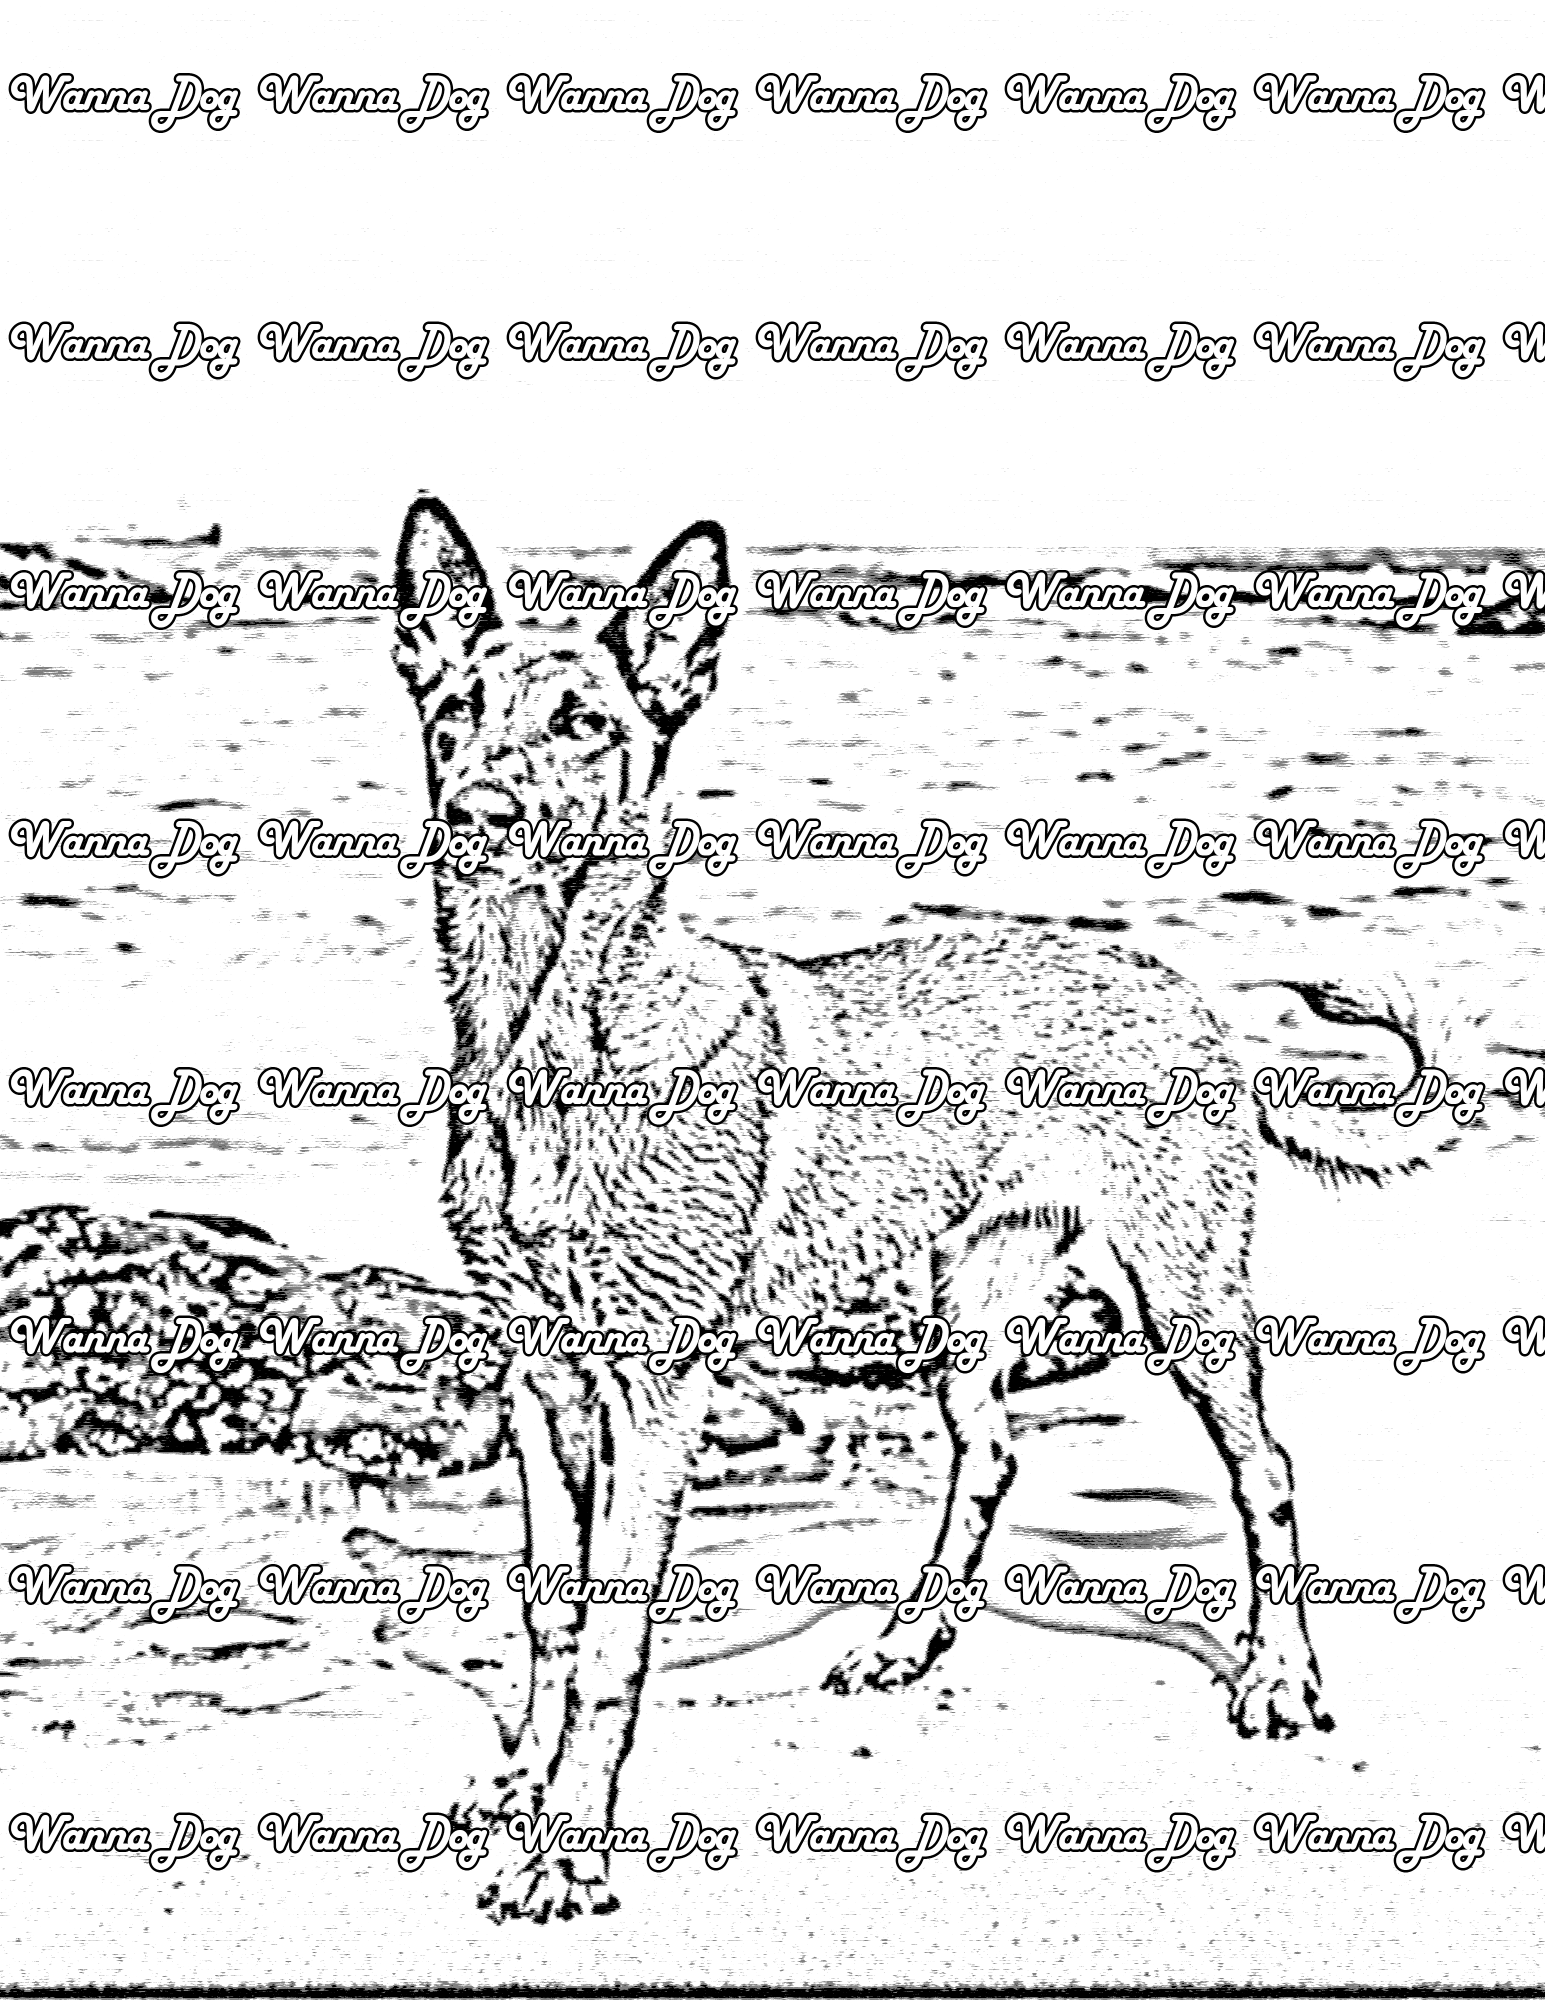 Belgian Malinois Coloring Page of a Belgian Malinois at the beach